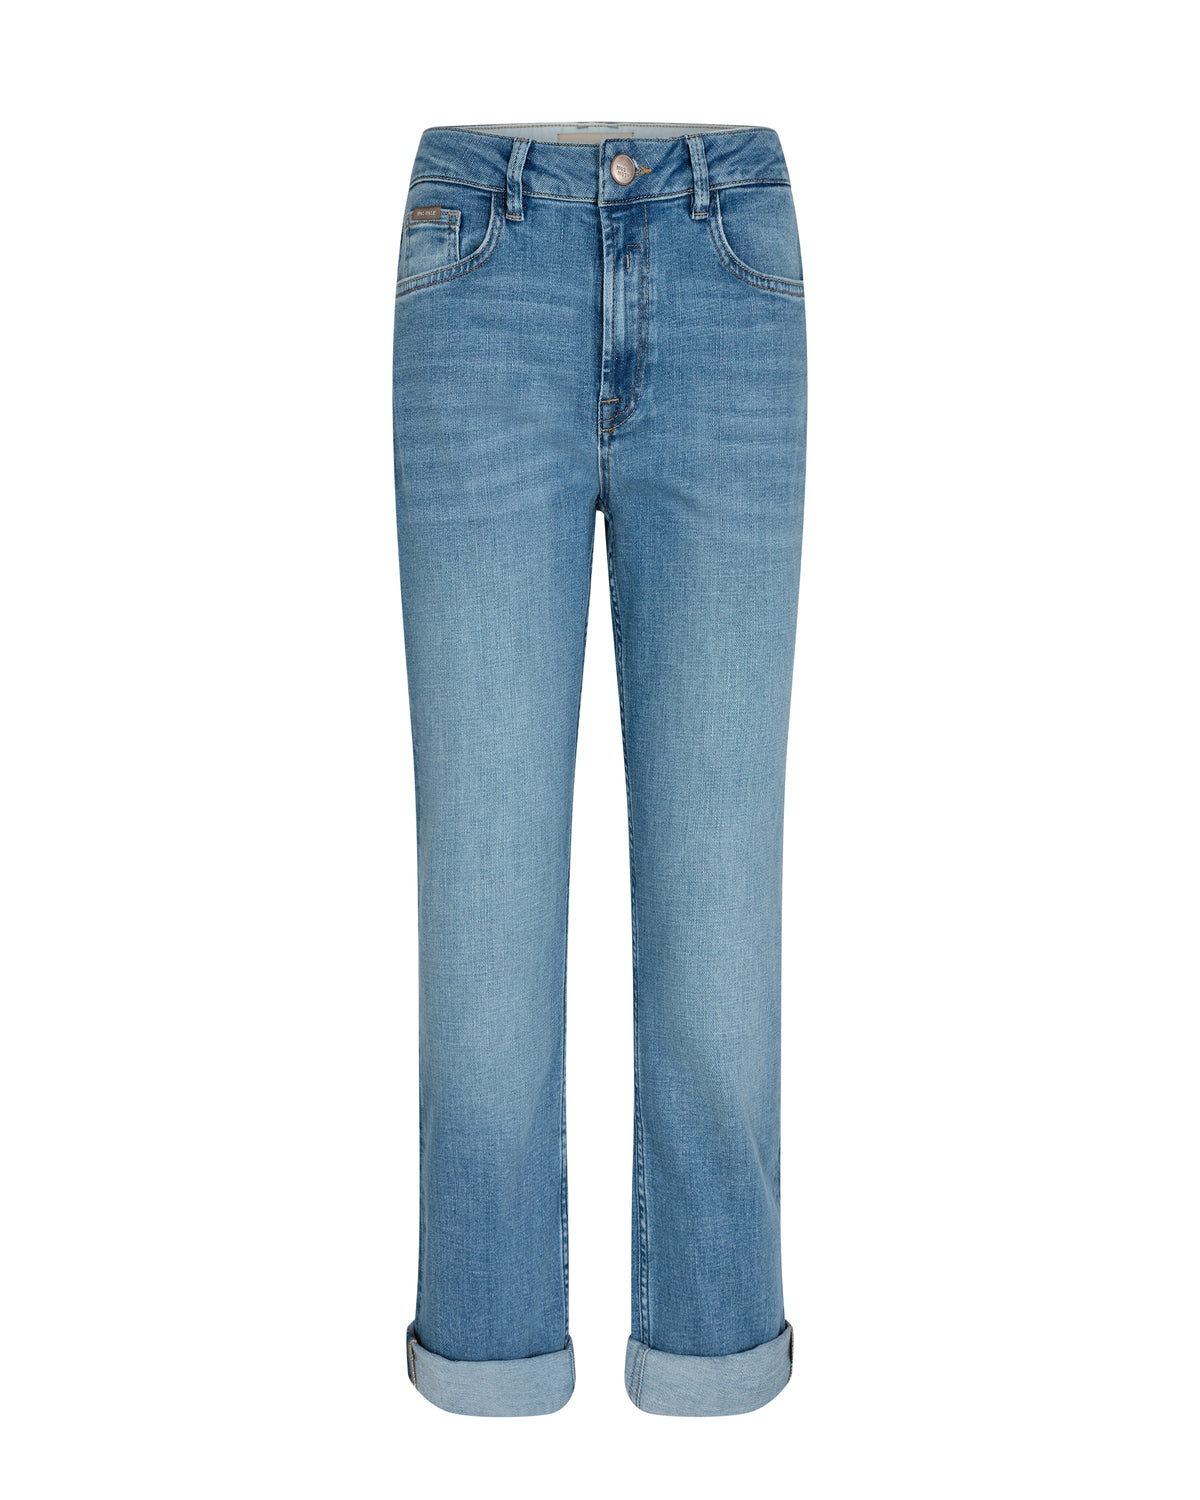 Mid rise pale wash denim with a rolled hem